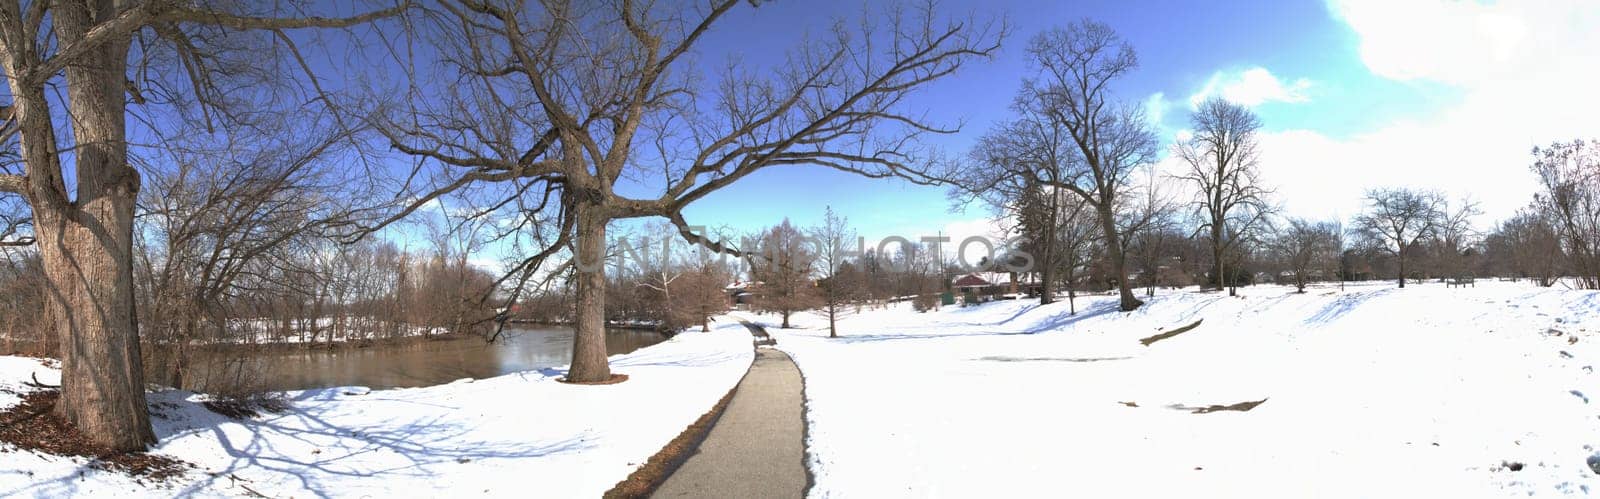 Winter wonderland: A tranquil snow-covered path winds through a serene park, flanked by bare trees and a picturesque river. Perfect for capturing the peaceful solitude and changing seasons.